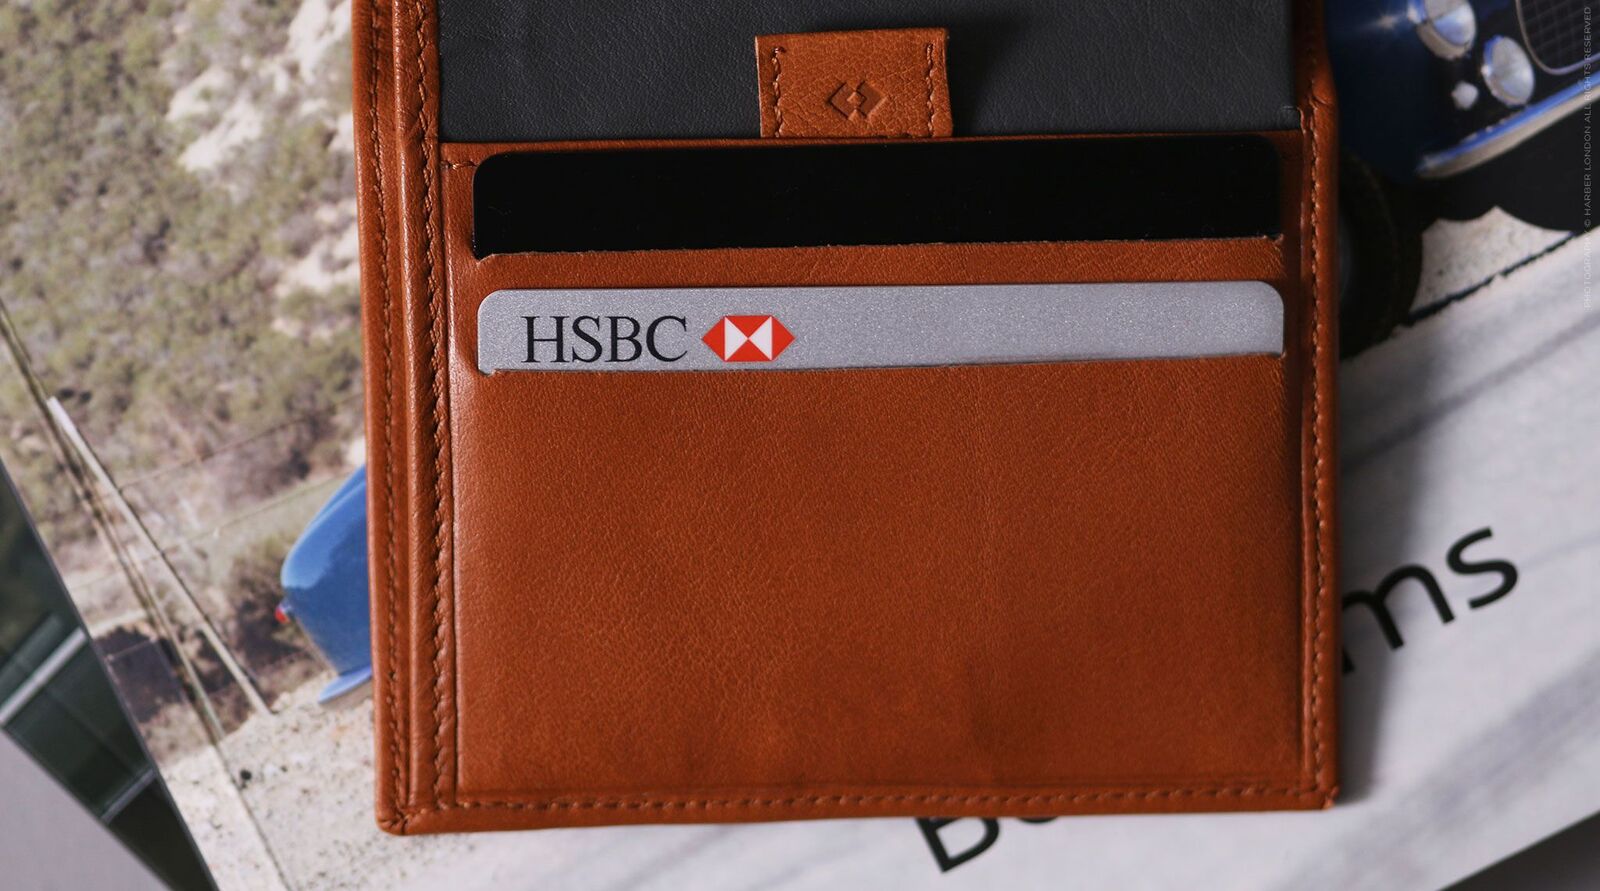 Harber Bifold Wallet with RFID Protection | The Coolector